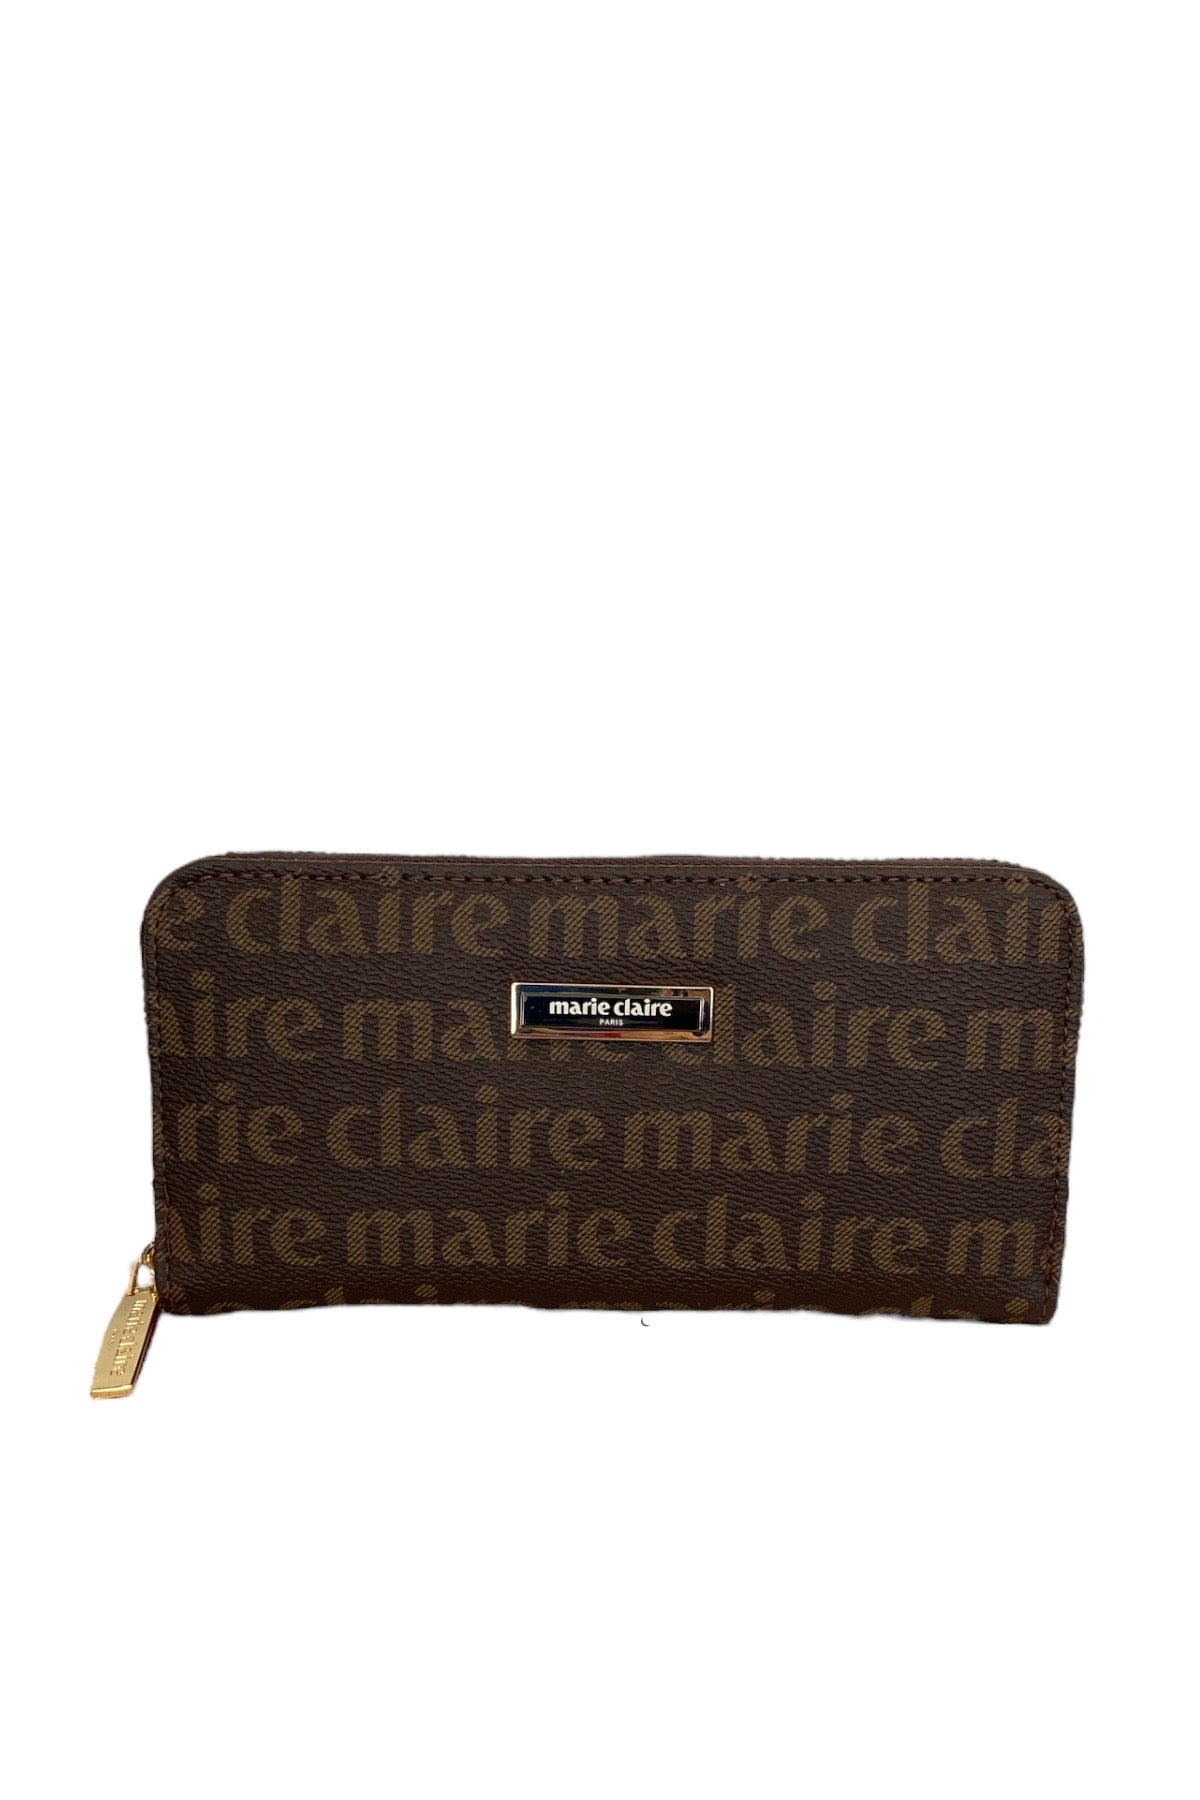 marie claire handbag with charm | Shop at Mercari from Japan! | Buyee  bot-online